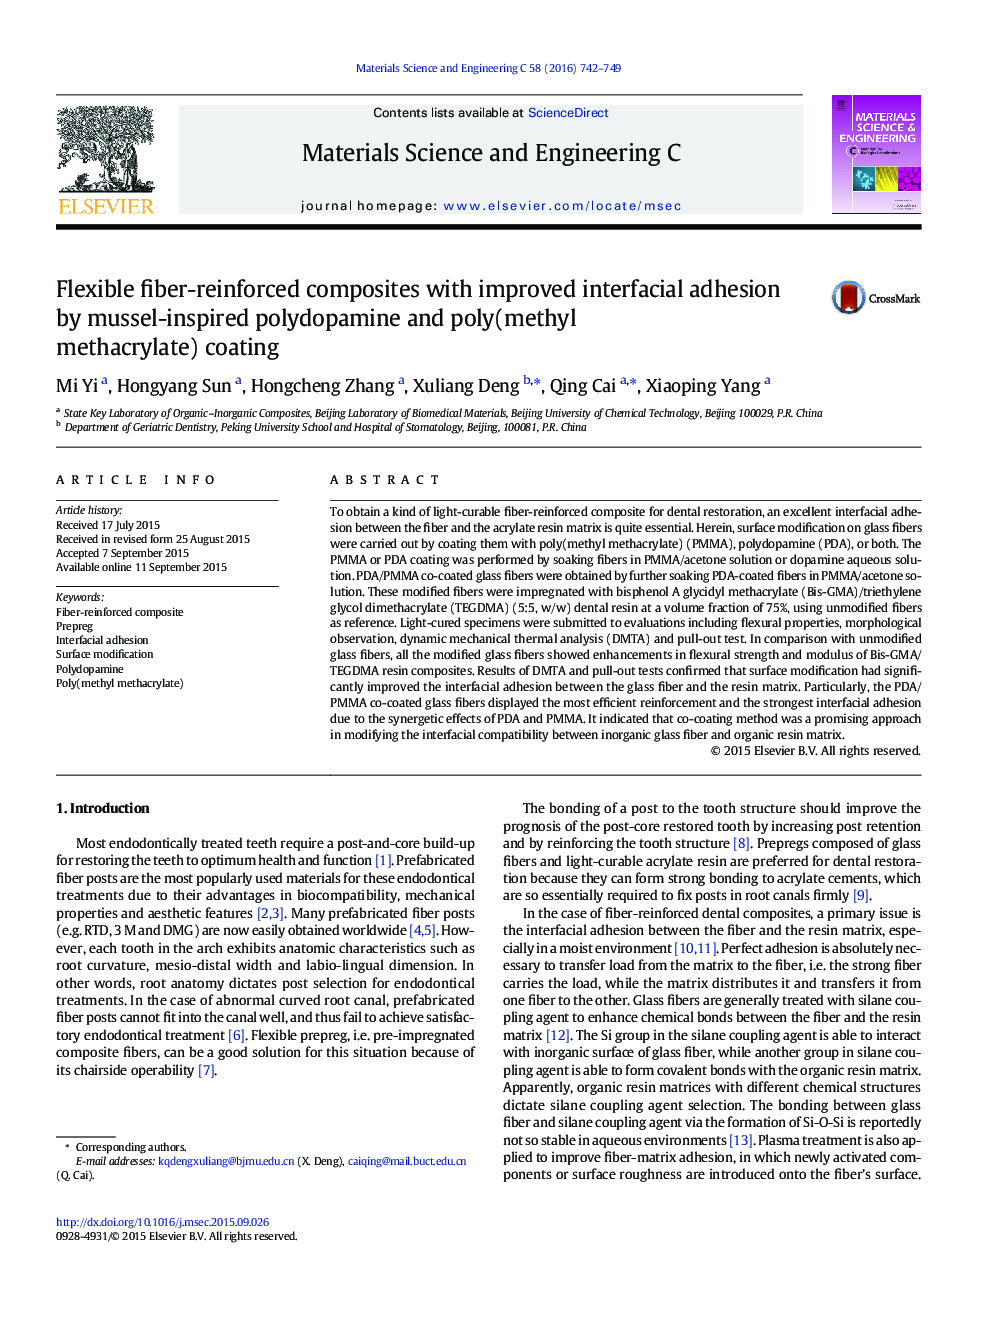 Flexible Fiber Reinforced Composites With Improved Interfacial Adhesion By Mussel Inspired Polydopamine And Poly Methyl Methacry